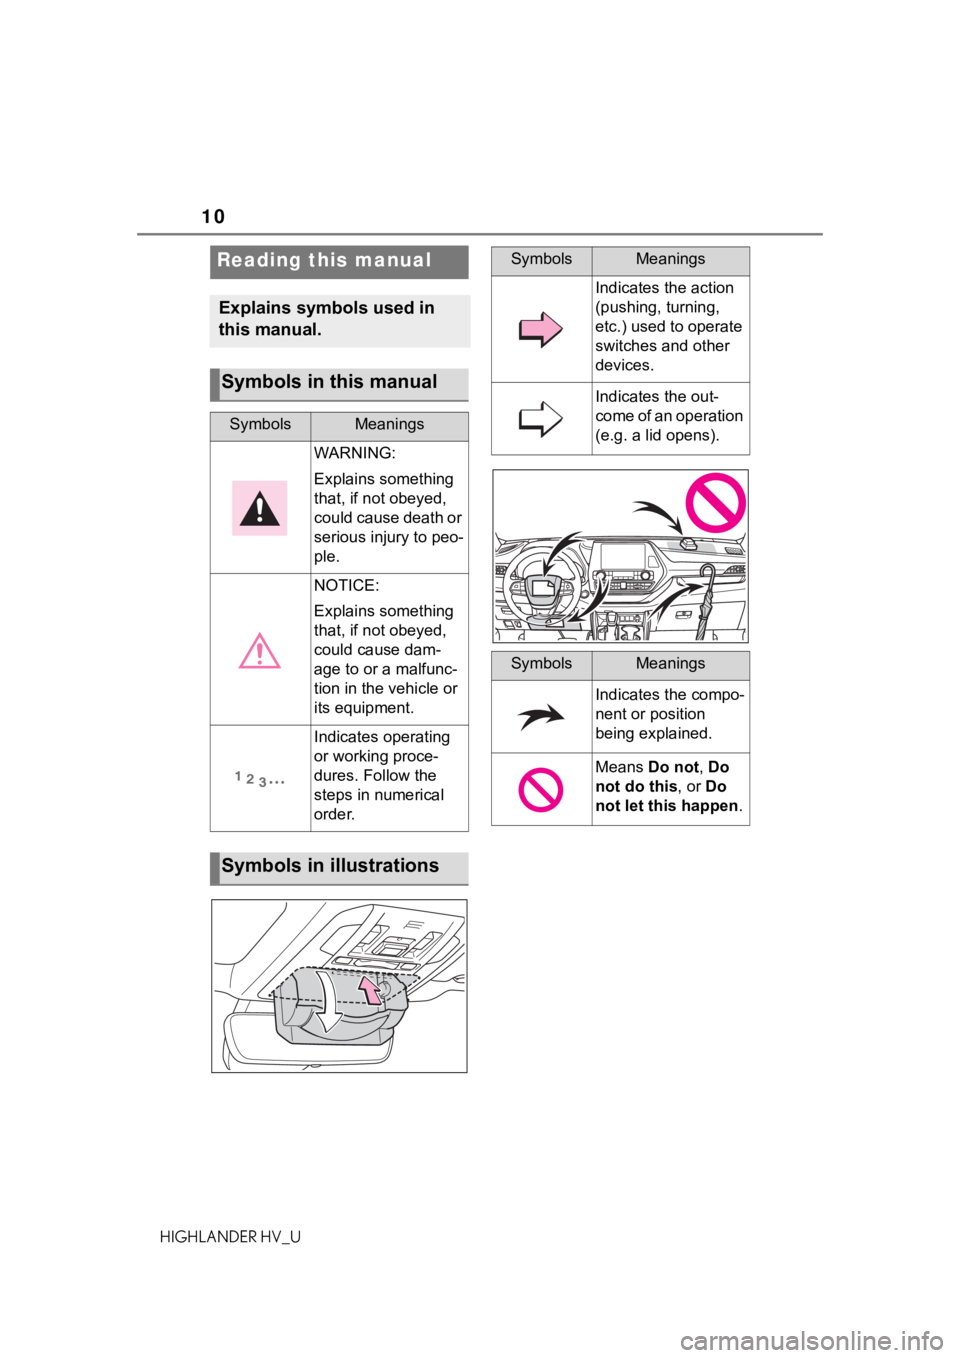 TOYOTA HIGHLANDER HYBRID 2020  Owners Manual (in English) 10
HIGHLANDER HV_U
Reading this manual
Explains symbols used in 
this manual.
Symbols in this manual
SymbolsMeanings
WARNING:
Explains something 
that, if not obeyed, 
could cause death or 
serious in